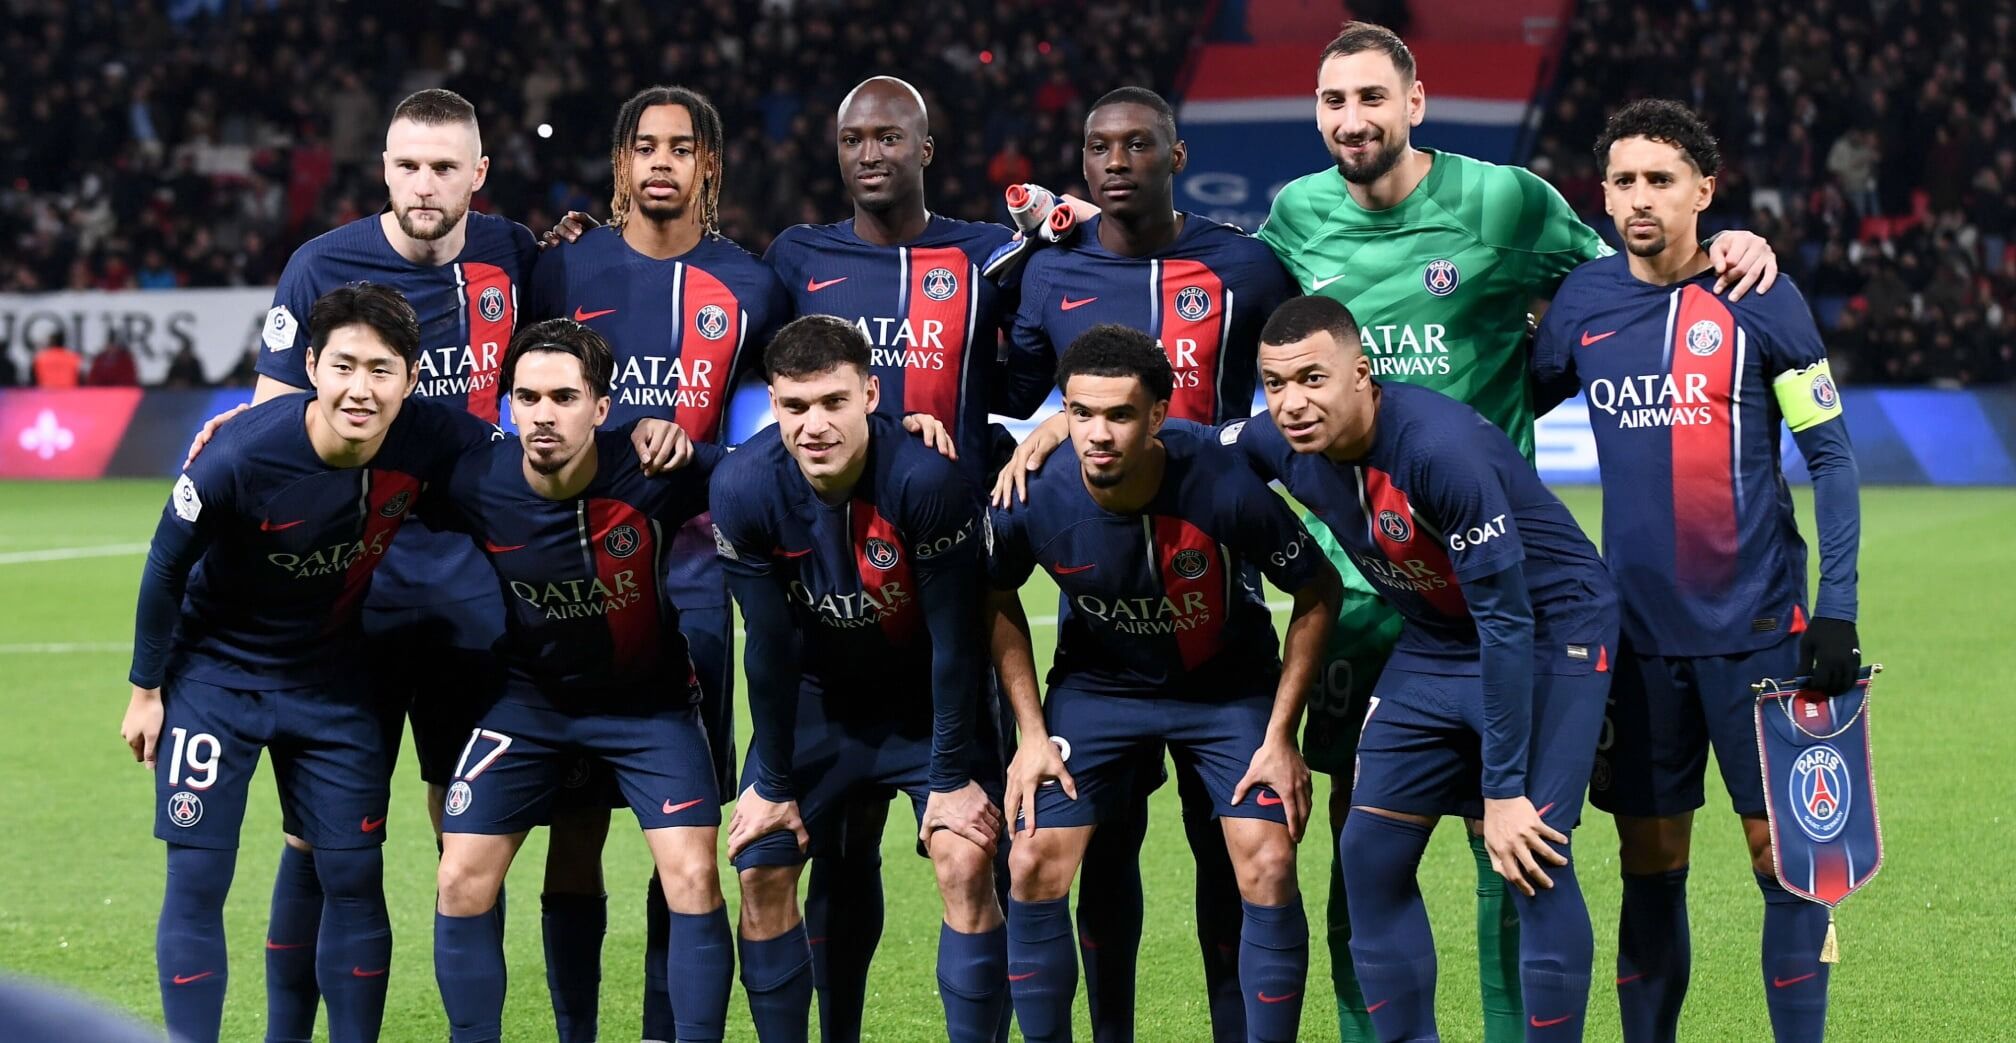 PSG To Purchase 4-5 Players With Money Saved From Mbappe's Departure